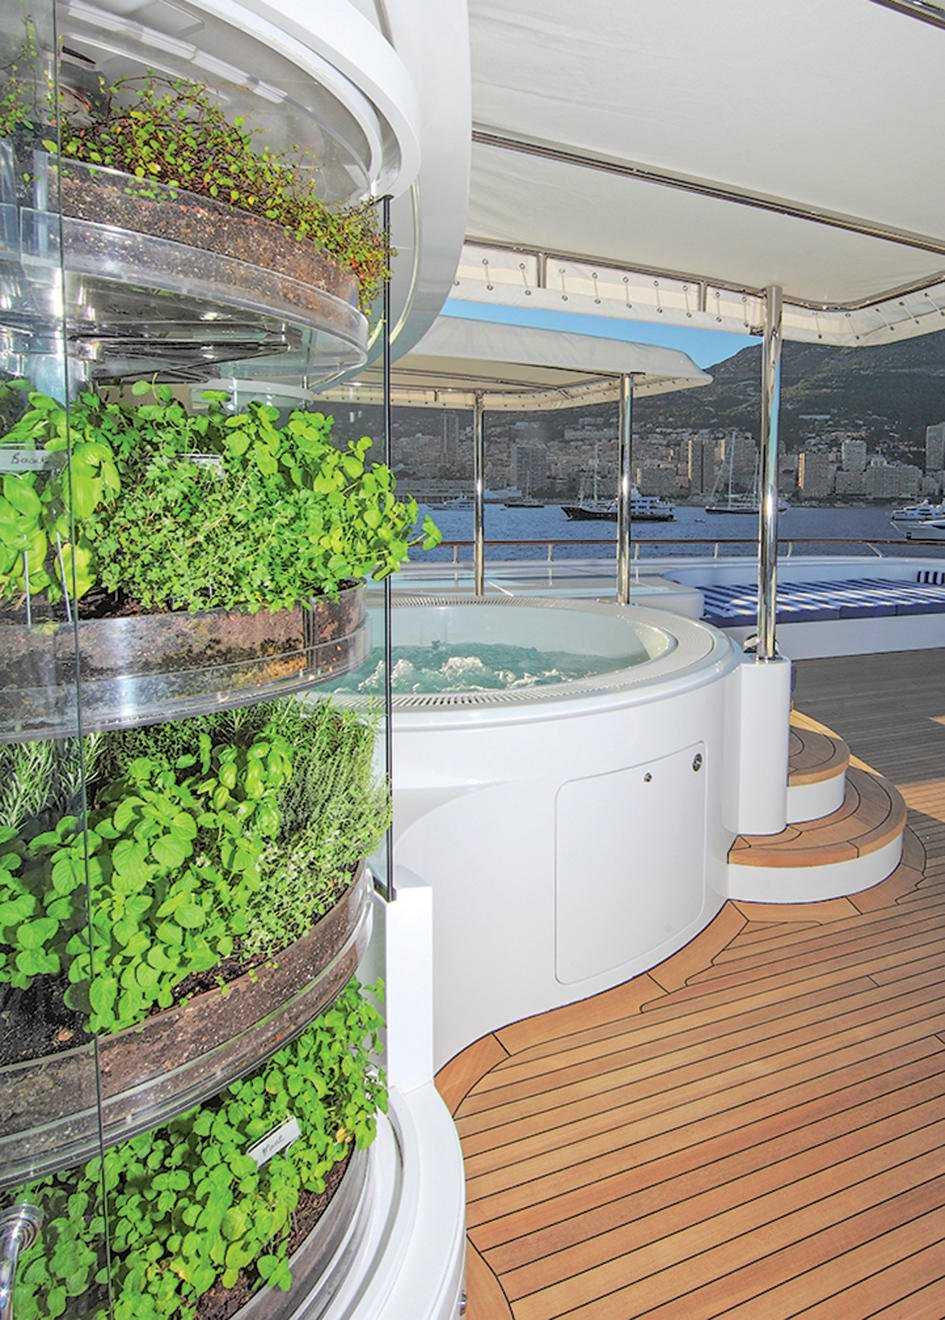 Herb garden MY Laurel - Karen Lynn Interiors - Interior Design for Yacht, Aircrafts and Residential Projects